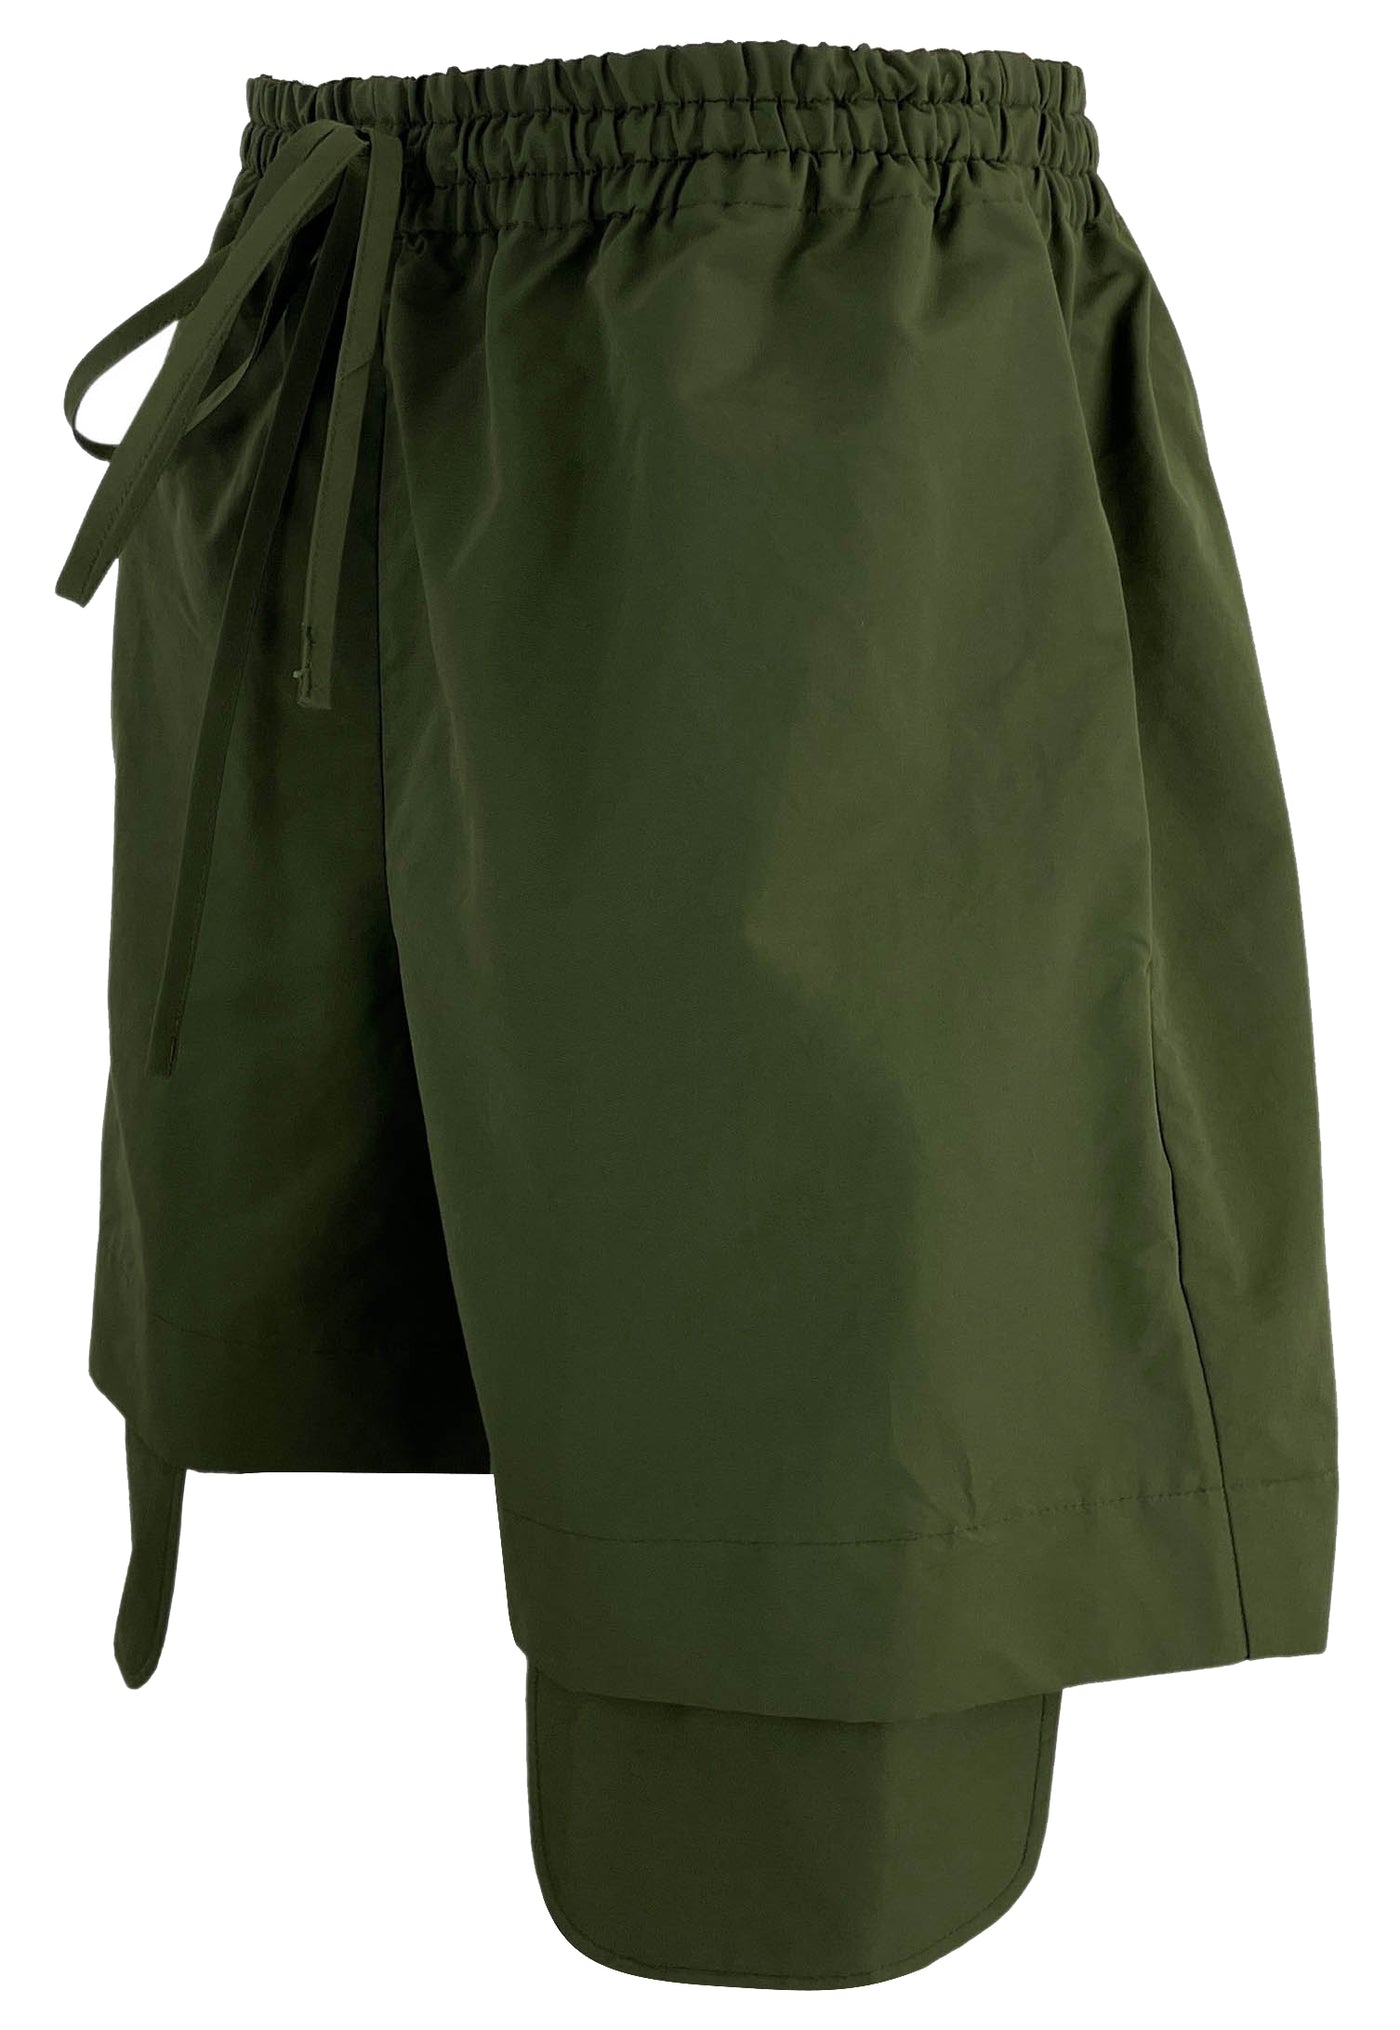 A.Potts Parachute Pocket Shorts in Olive - Discounts on A.Potts at UAL